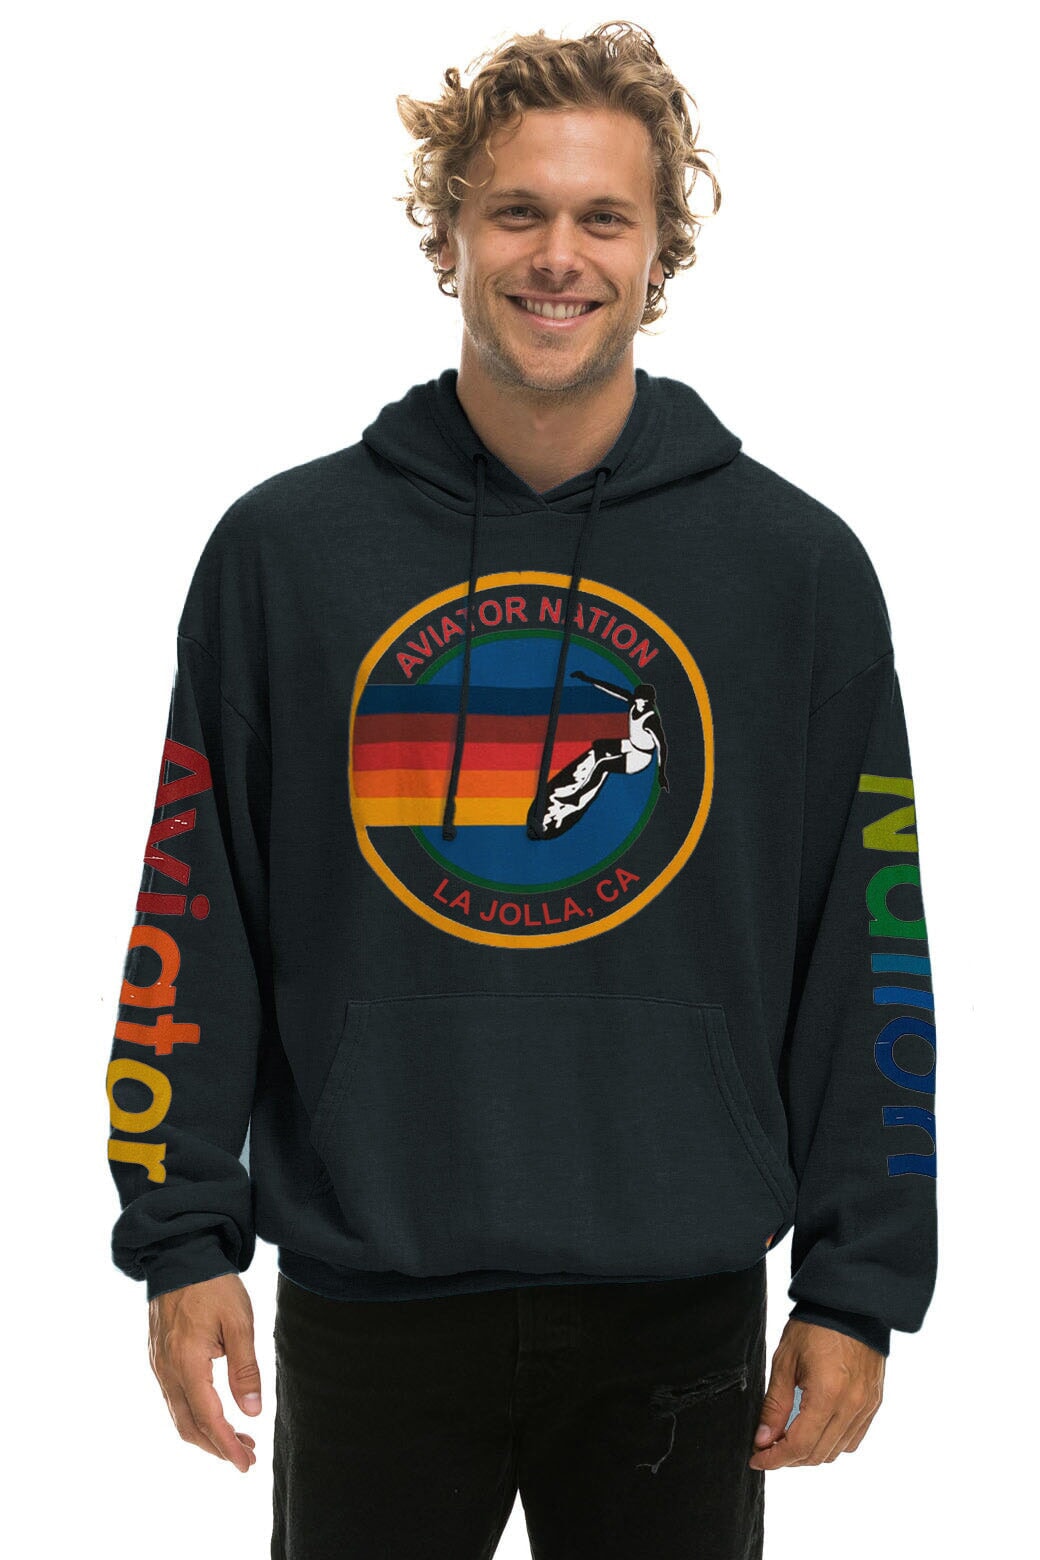 AVIATOR NATION LA JOLLA RELAXED PULLOVER HOODIE - CHARCOAL Hoodie Aviator Nation 